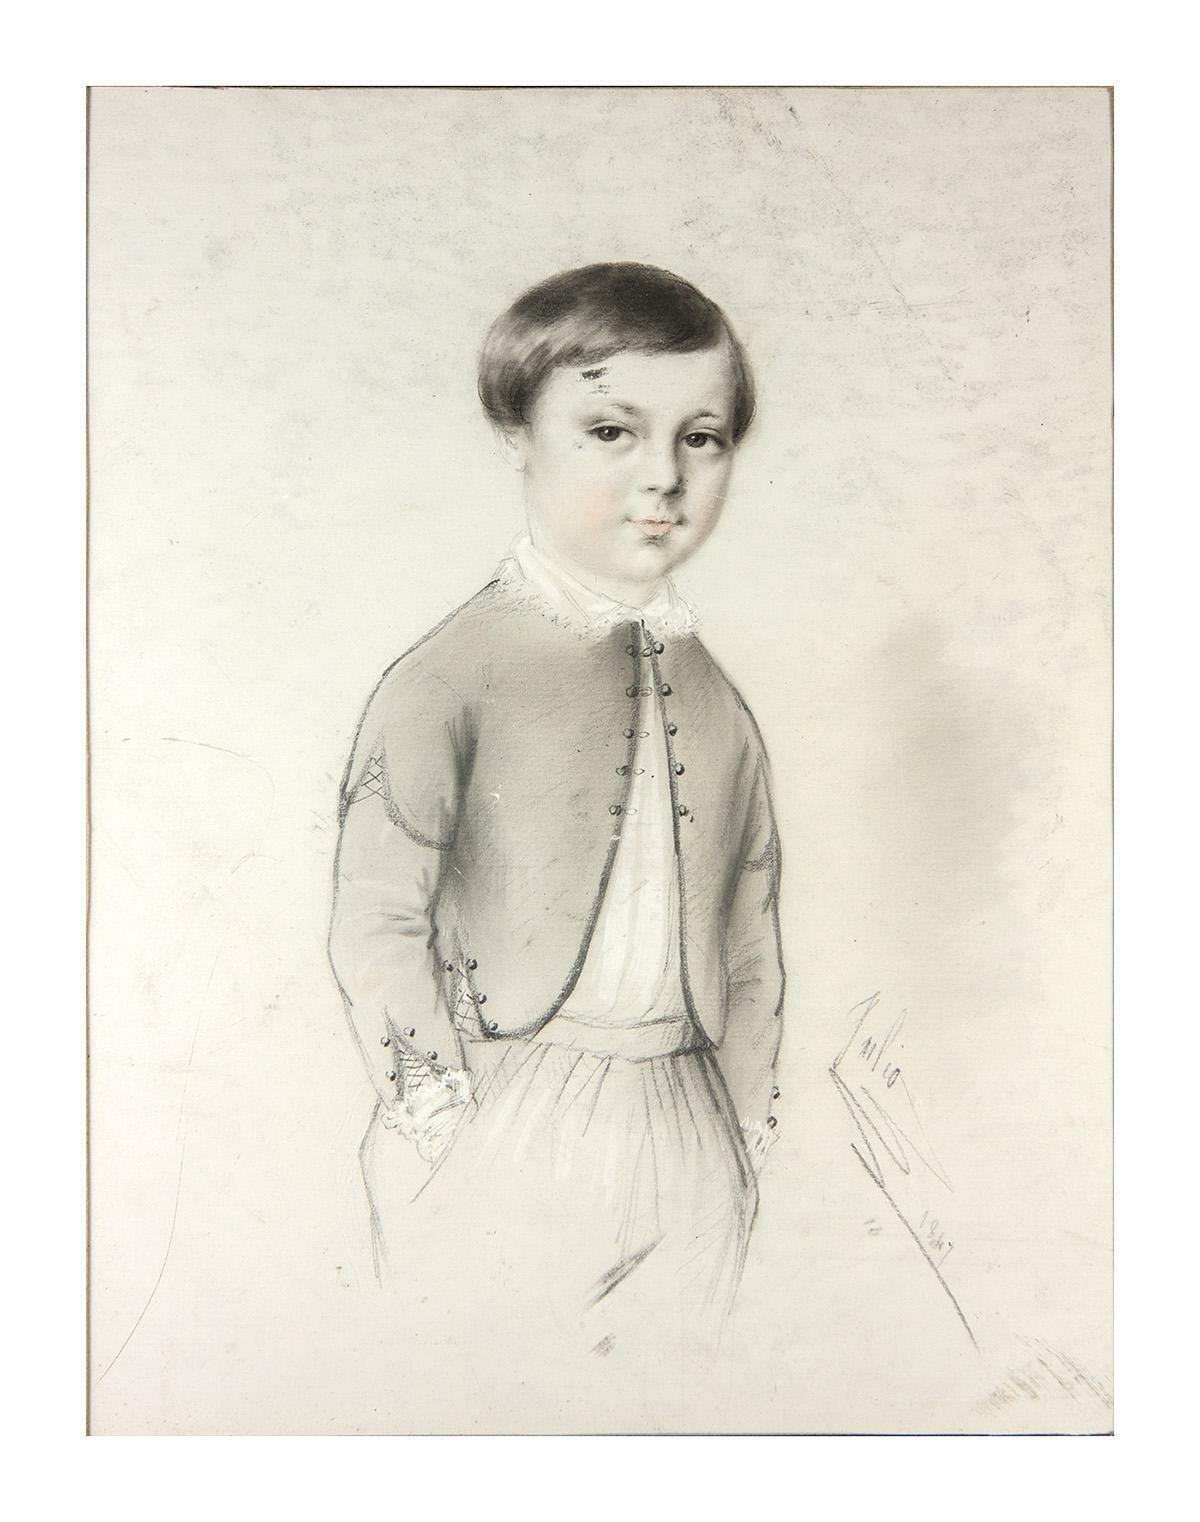 Exceptional Antique Pencil Drawing, Portrait of a Boy, 14x11" Frame, Signed 1847